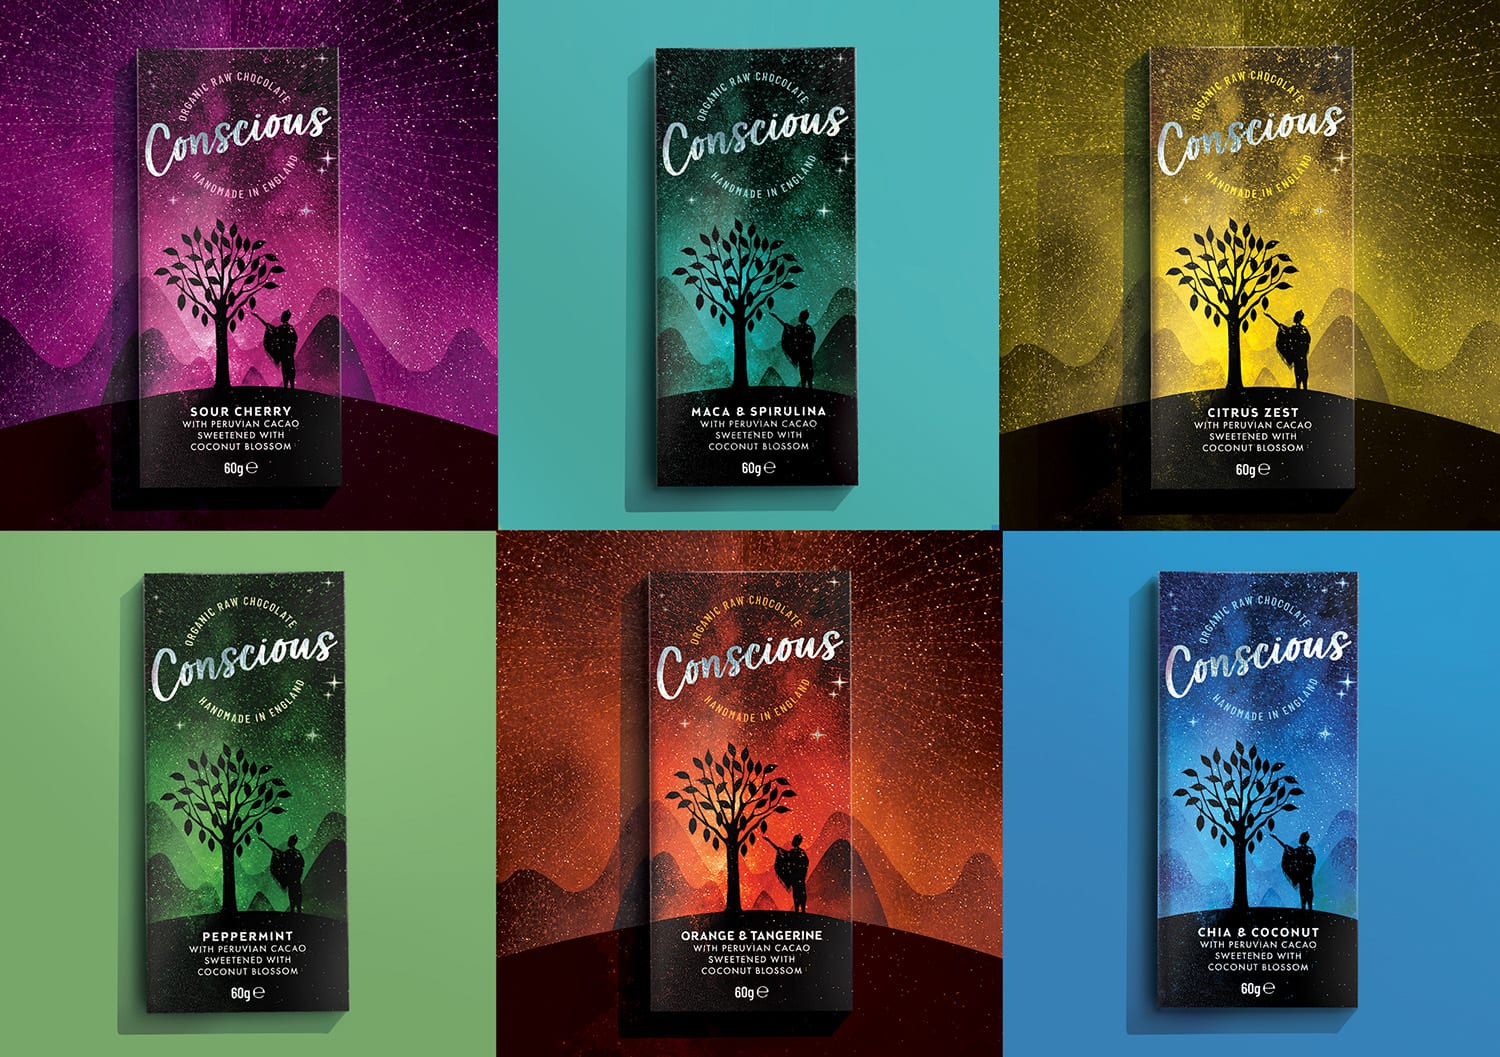 The Space Creative Creates Bold New Look for Conscious